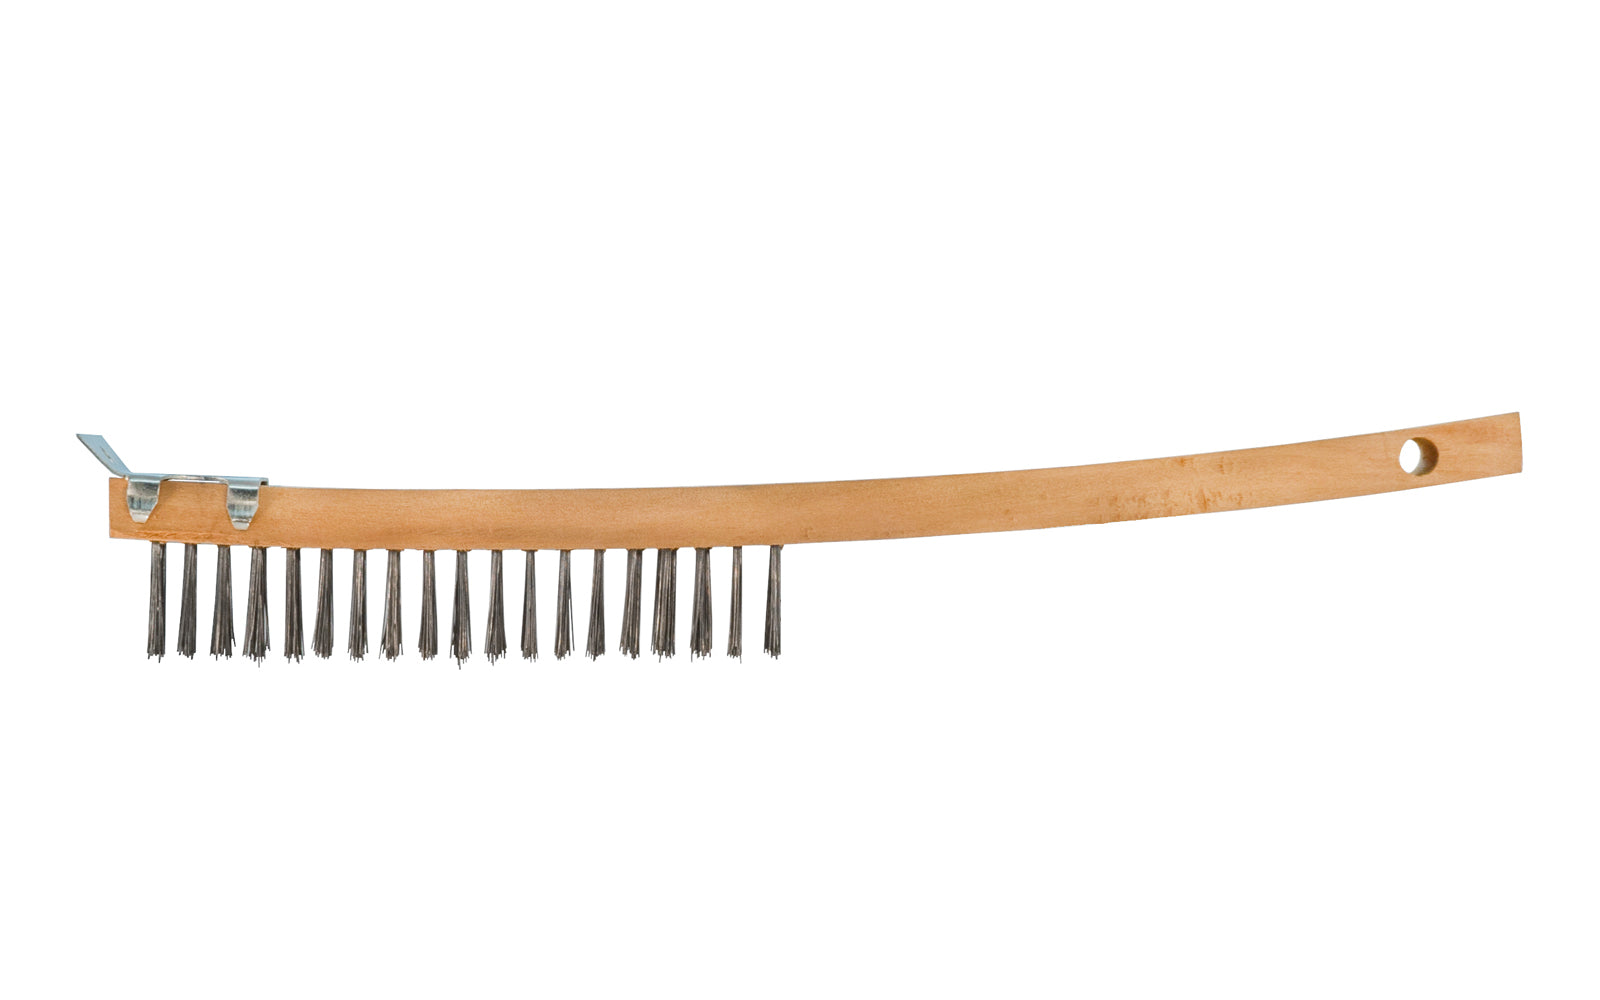 14" long carbon steel wire scratch brush & scraper with the filling material is staple set in a durable. Designed for general cleaning of many & various applications, including for use in shop, refinishing, stripping paint on home furniture, or for cleaning parts. 14" length brush - wooden handle. 6" length of bristles